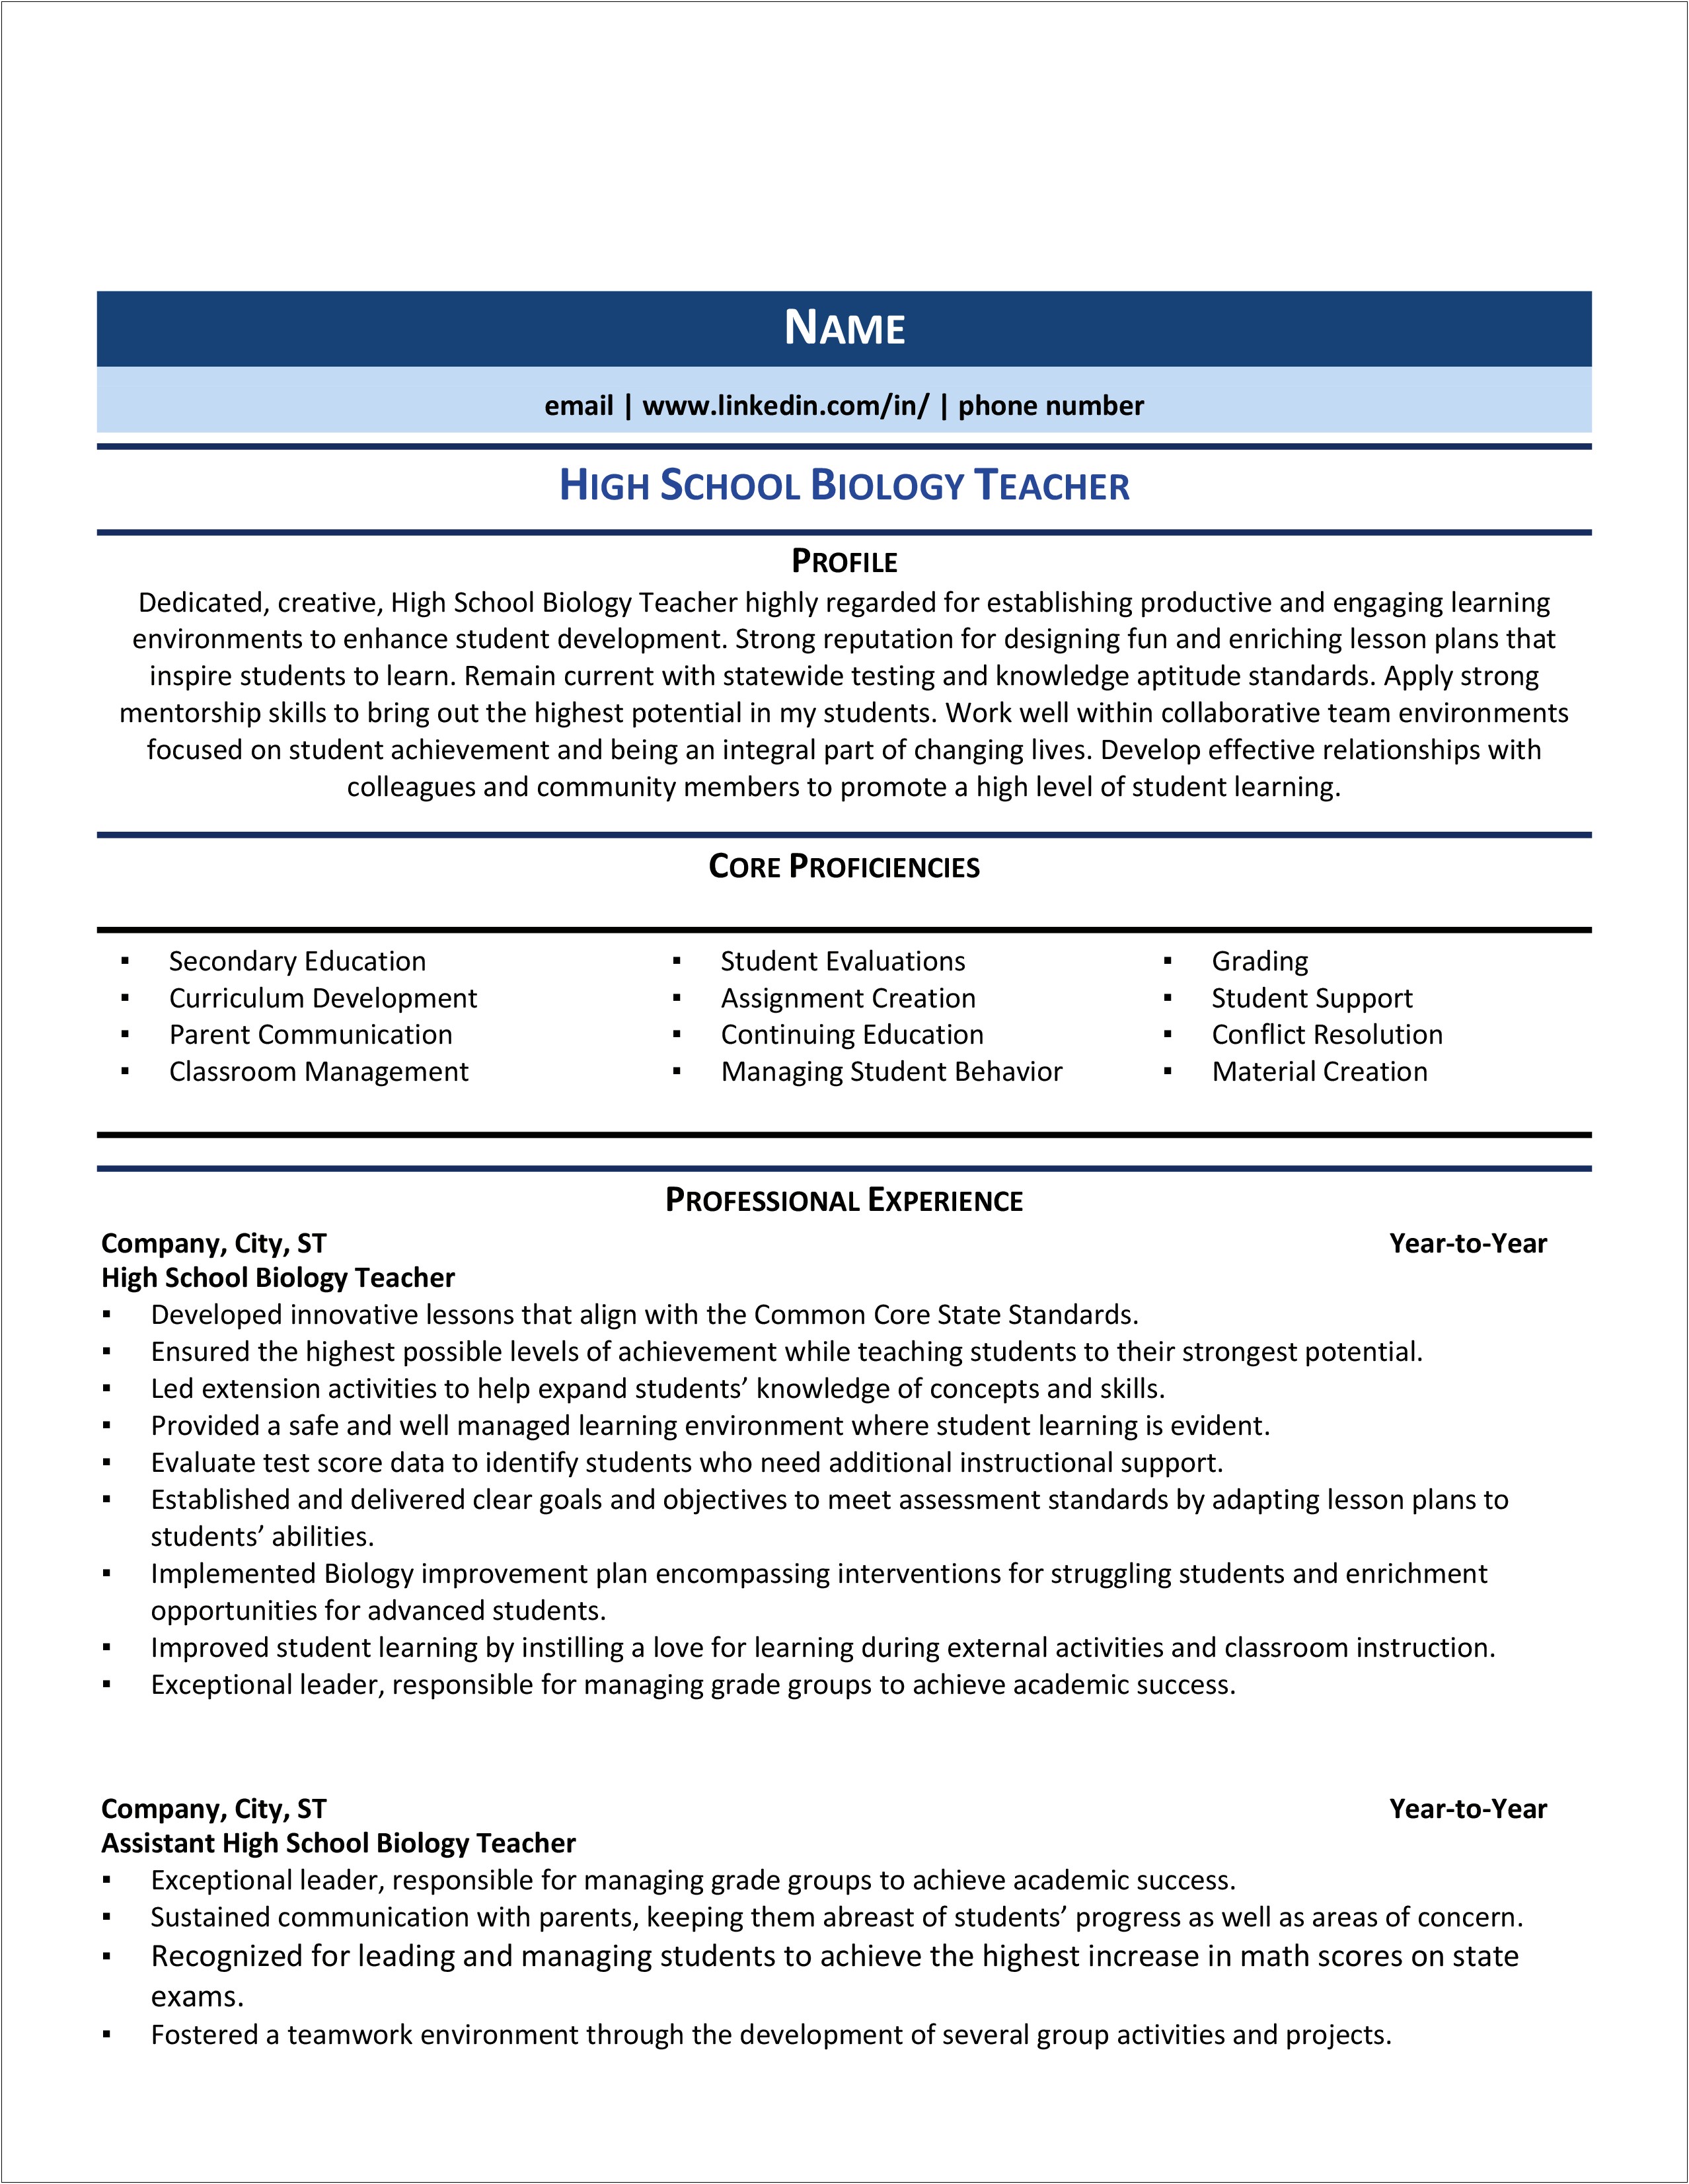 Resume Sections For High School Students